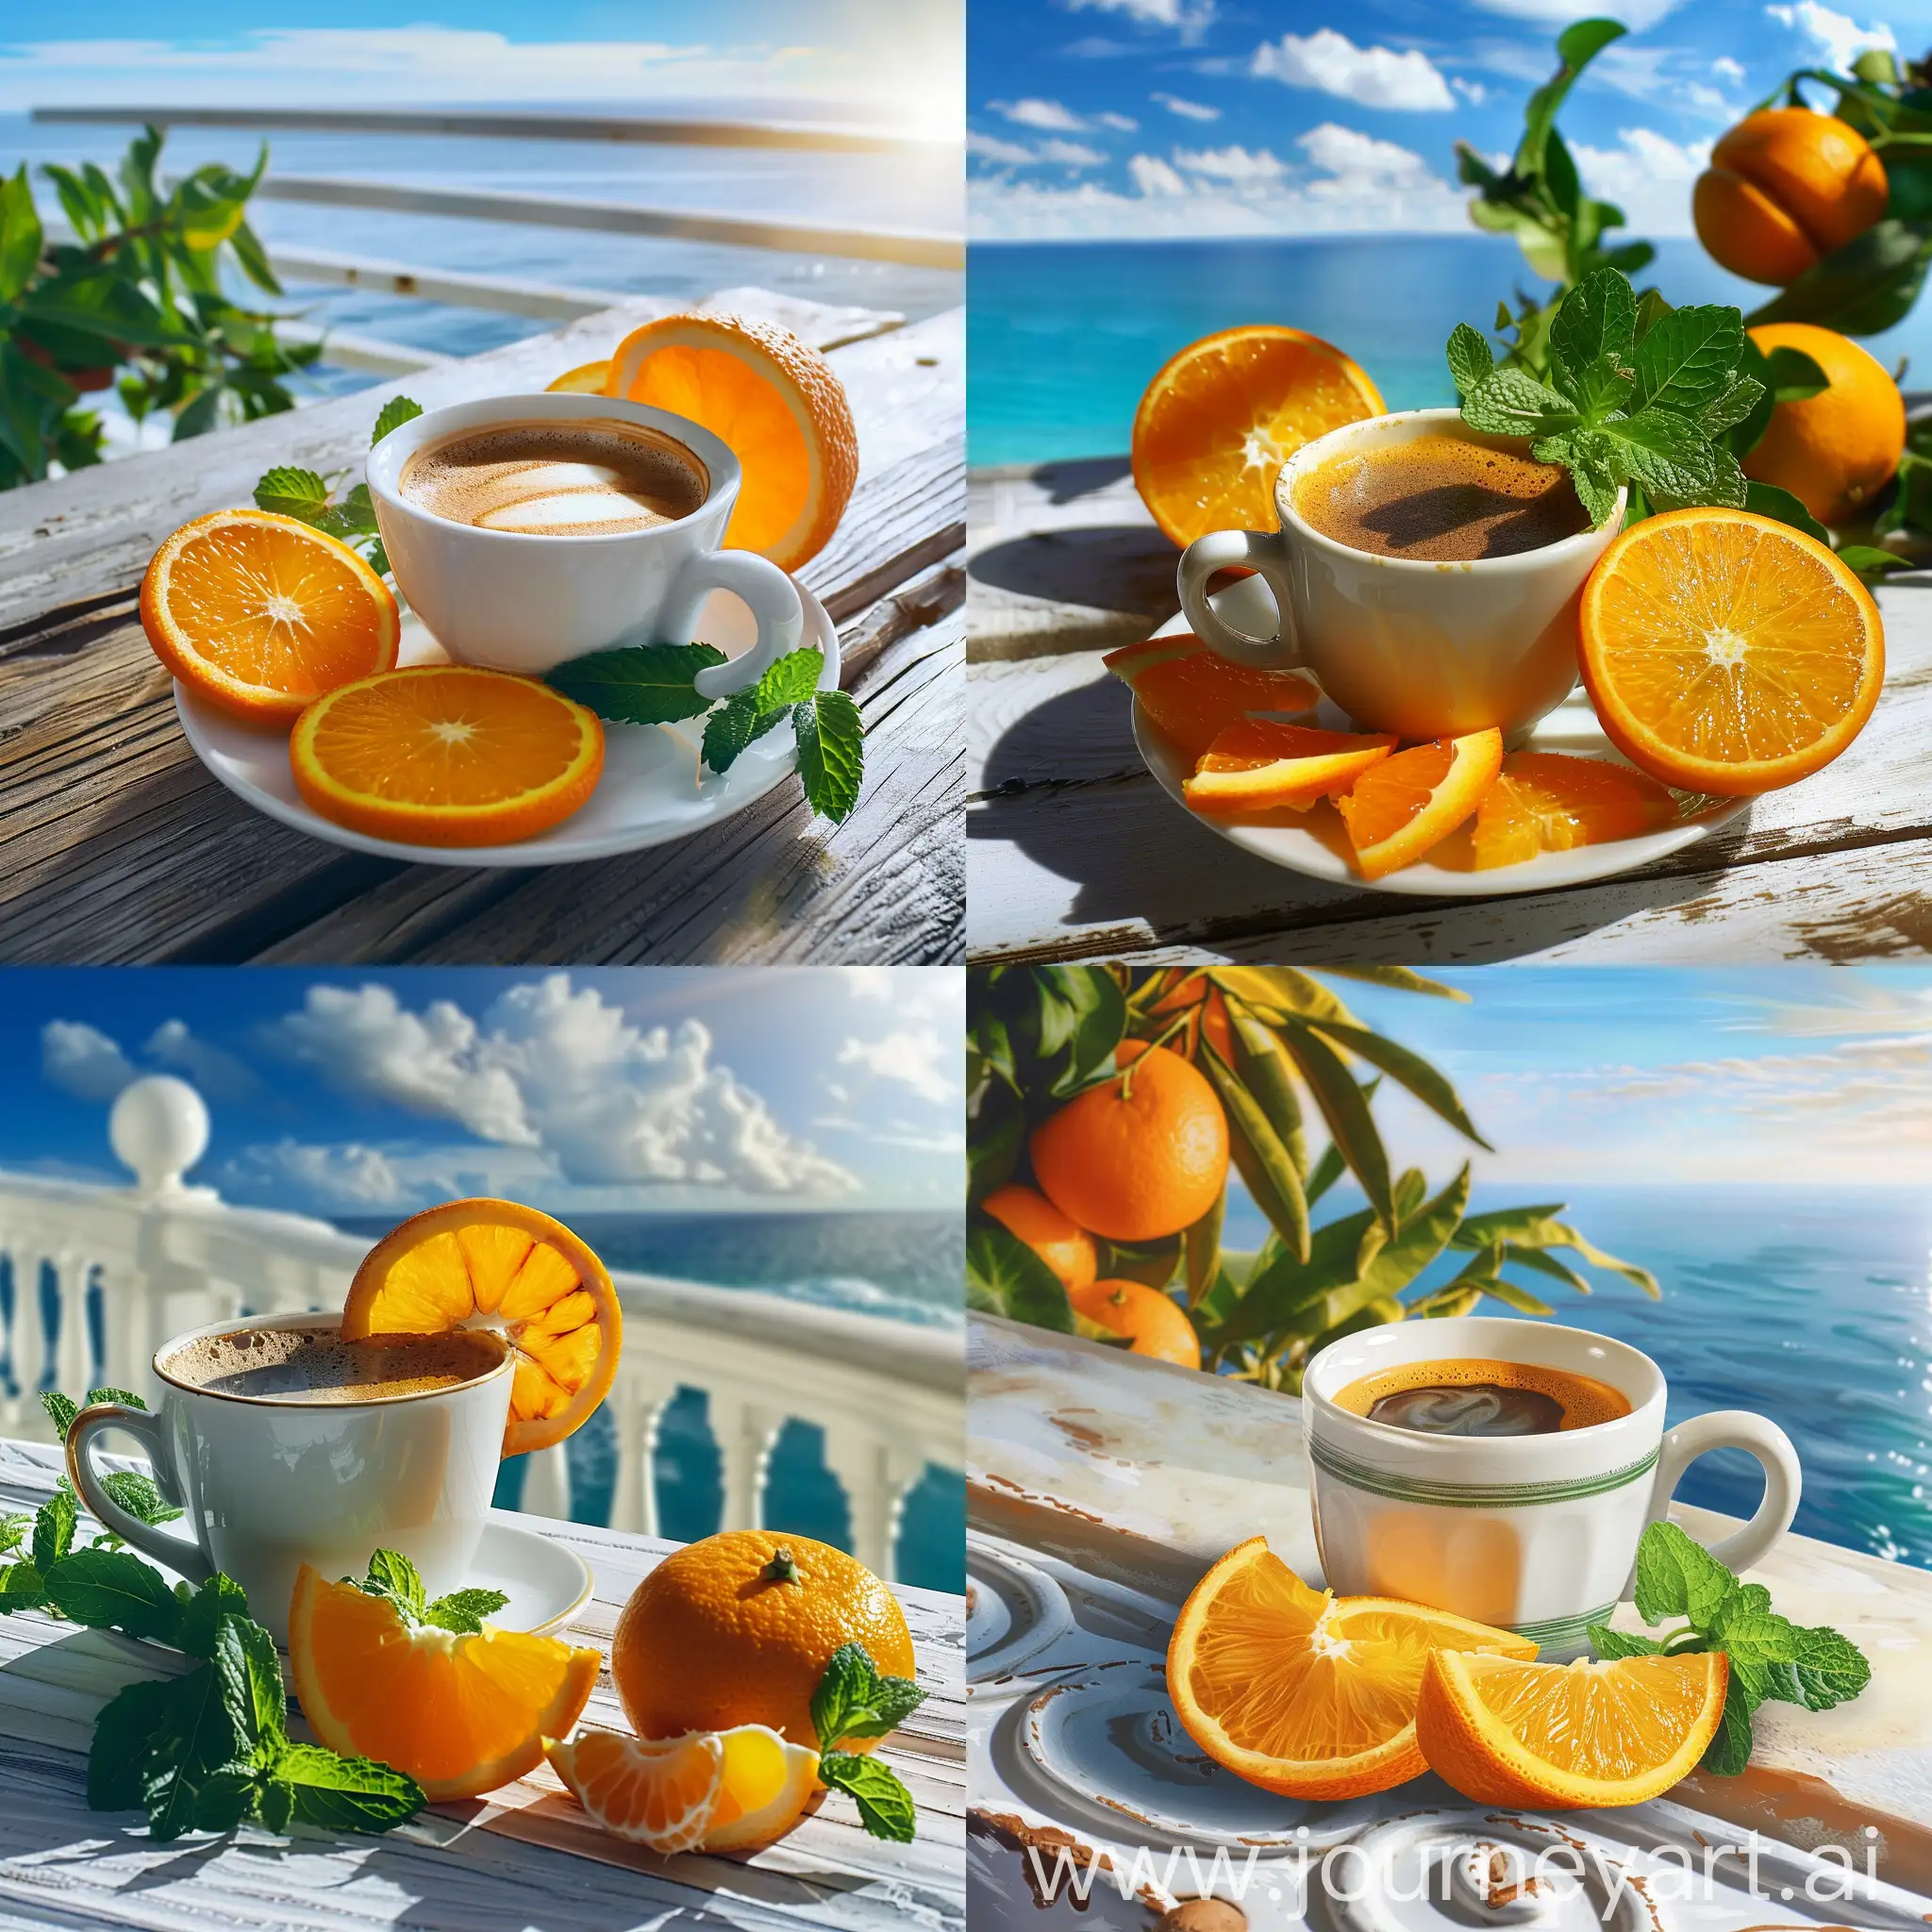 Refreshing-Espresso-with-Orange-Slices-and-Mint-on-Sunny-Terrace-Overlooking-Sea